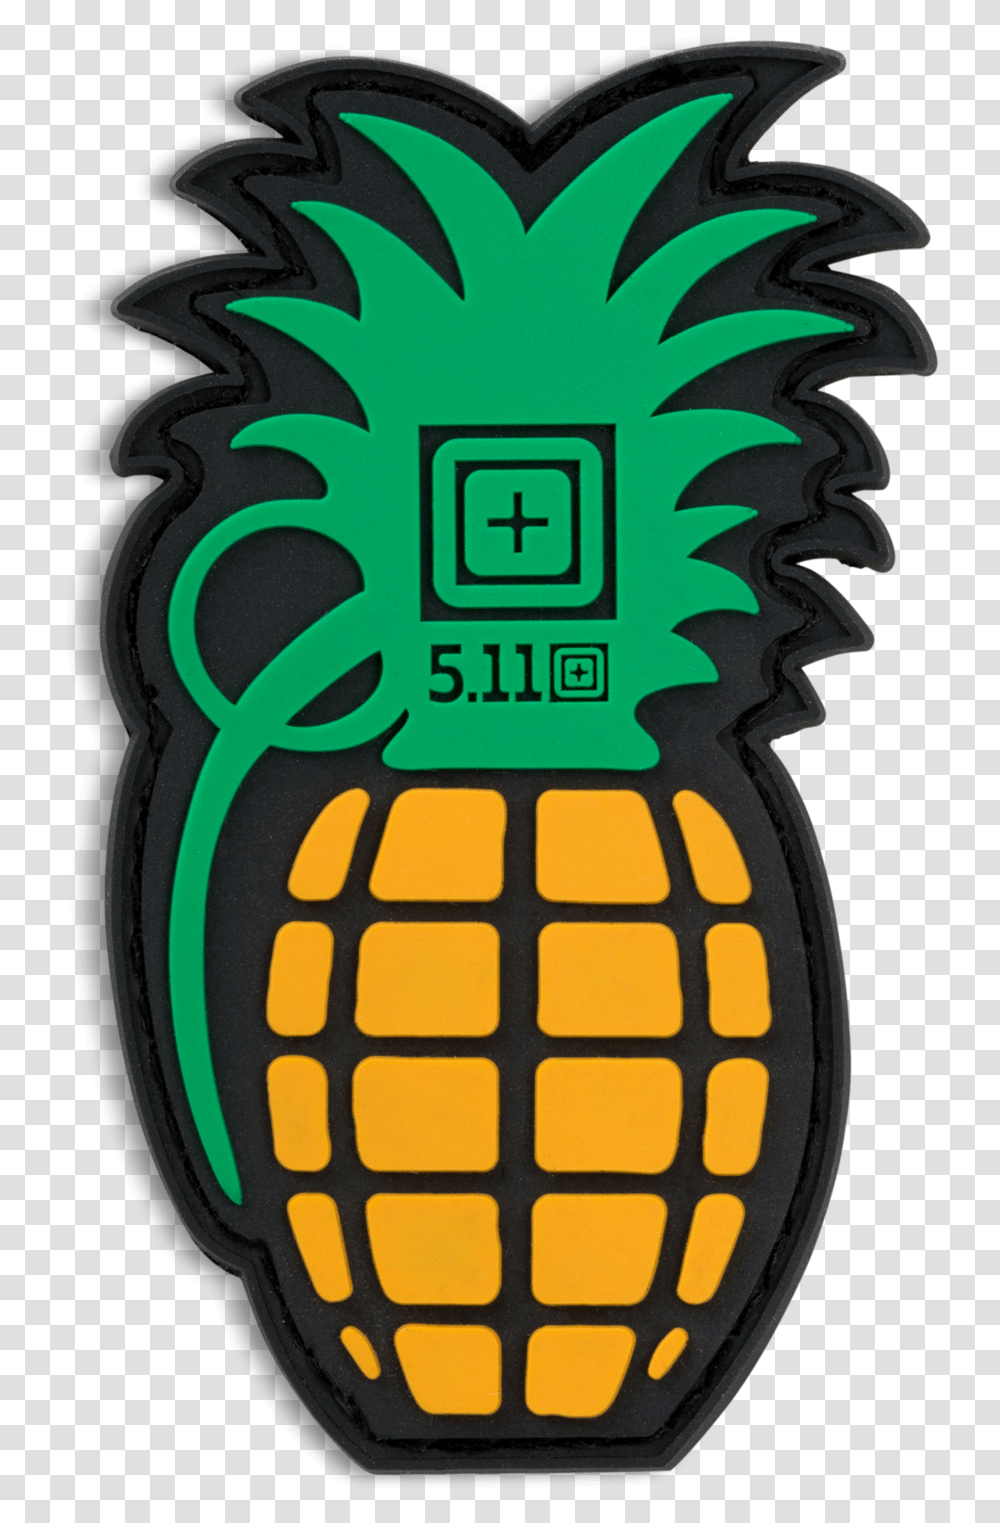 Pineapple Grenade Patch 511 Tactical Pineapple Grenade Patch, Electronics, Calculator, Text, Computer Transparent Png